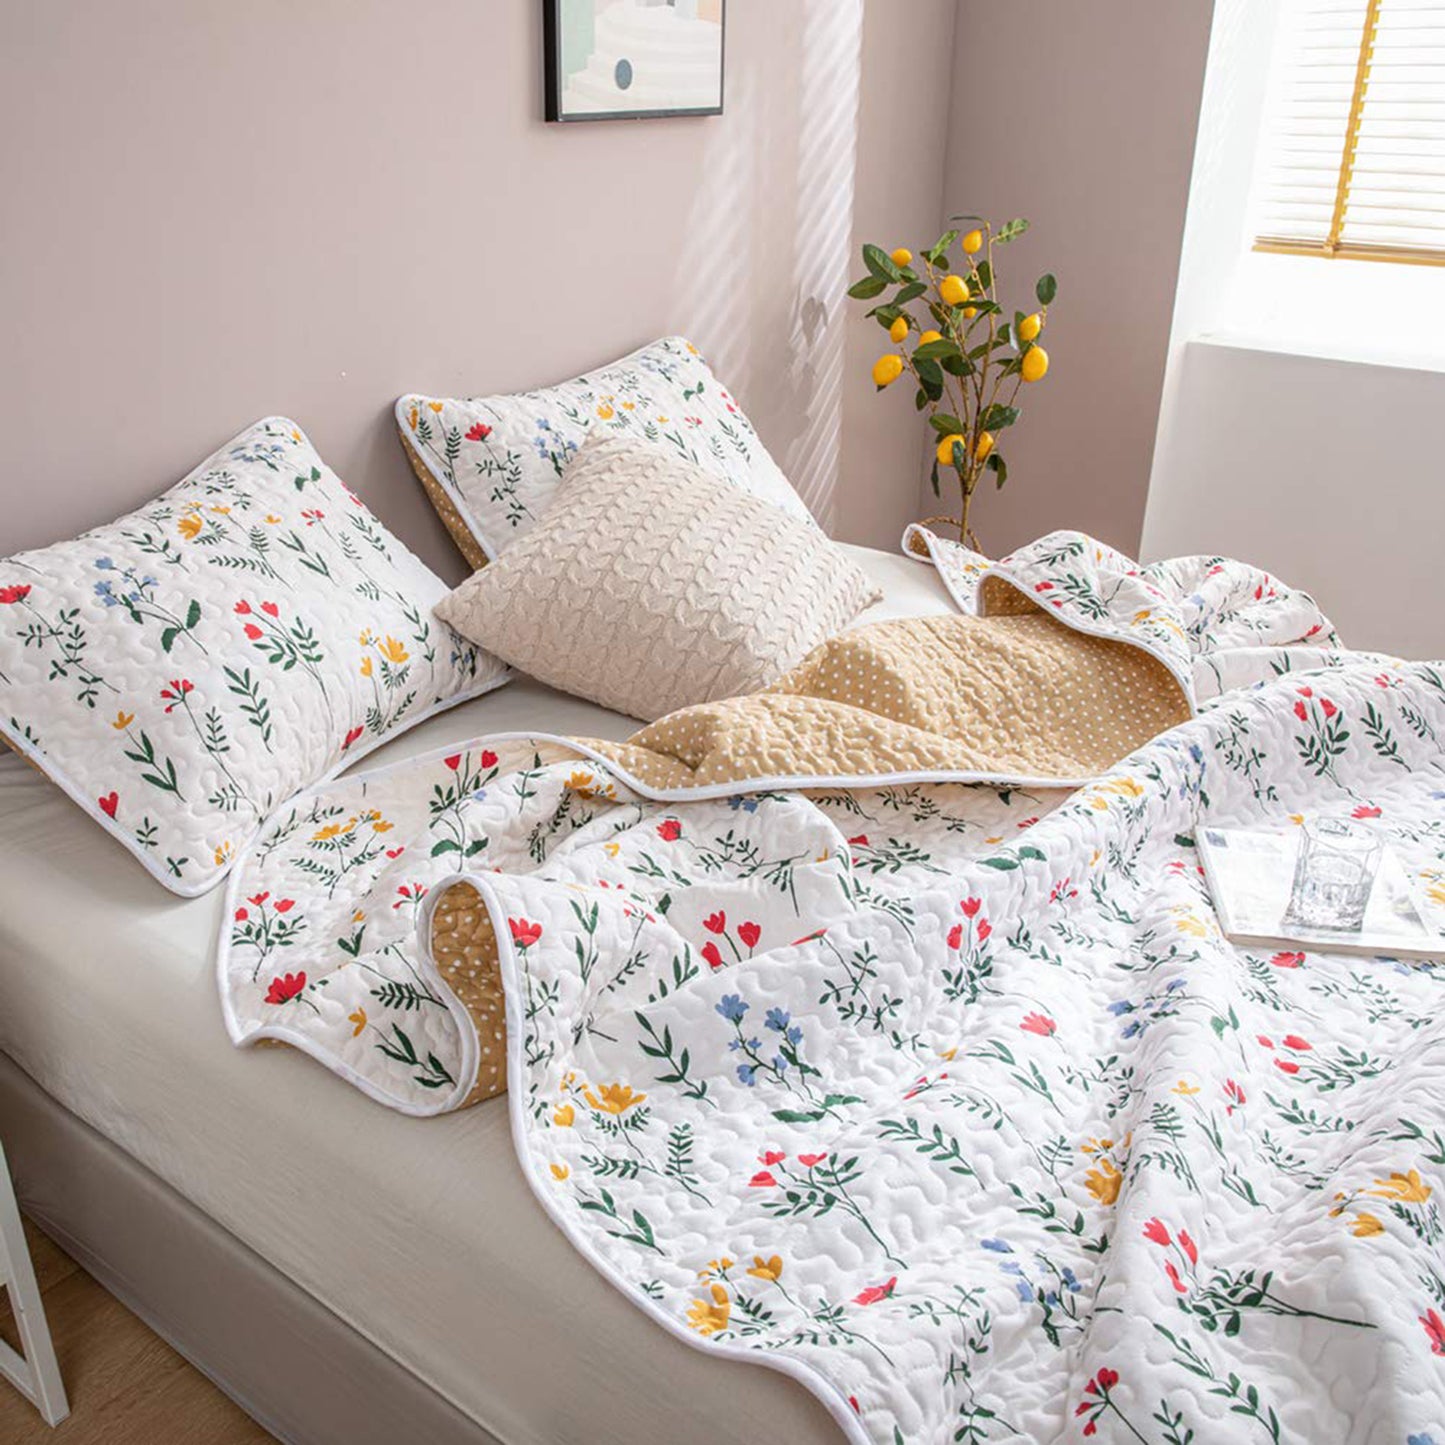 Blue Red Yellow Flowers Plants Printed Design Botanical Floral Bedding Sets